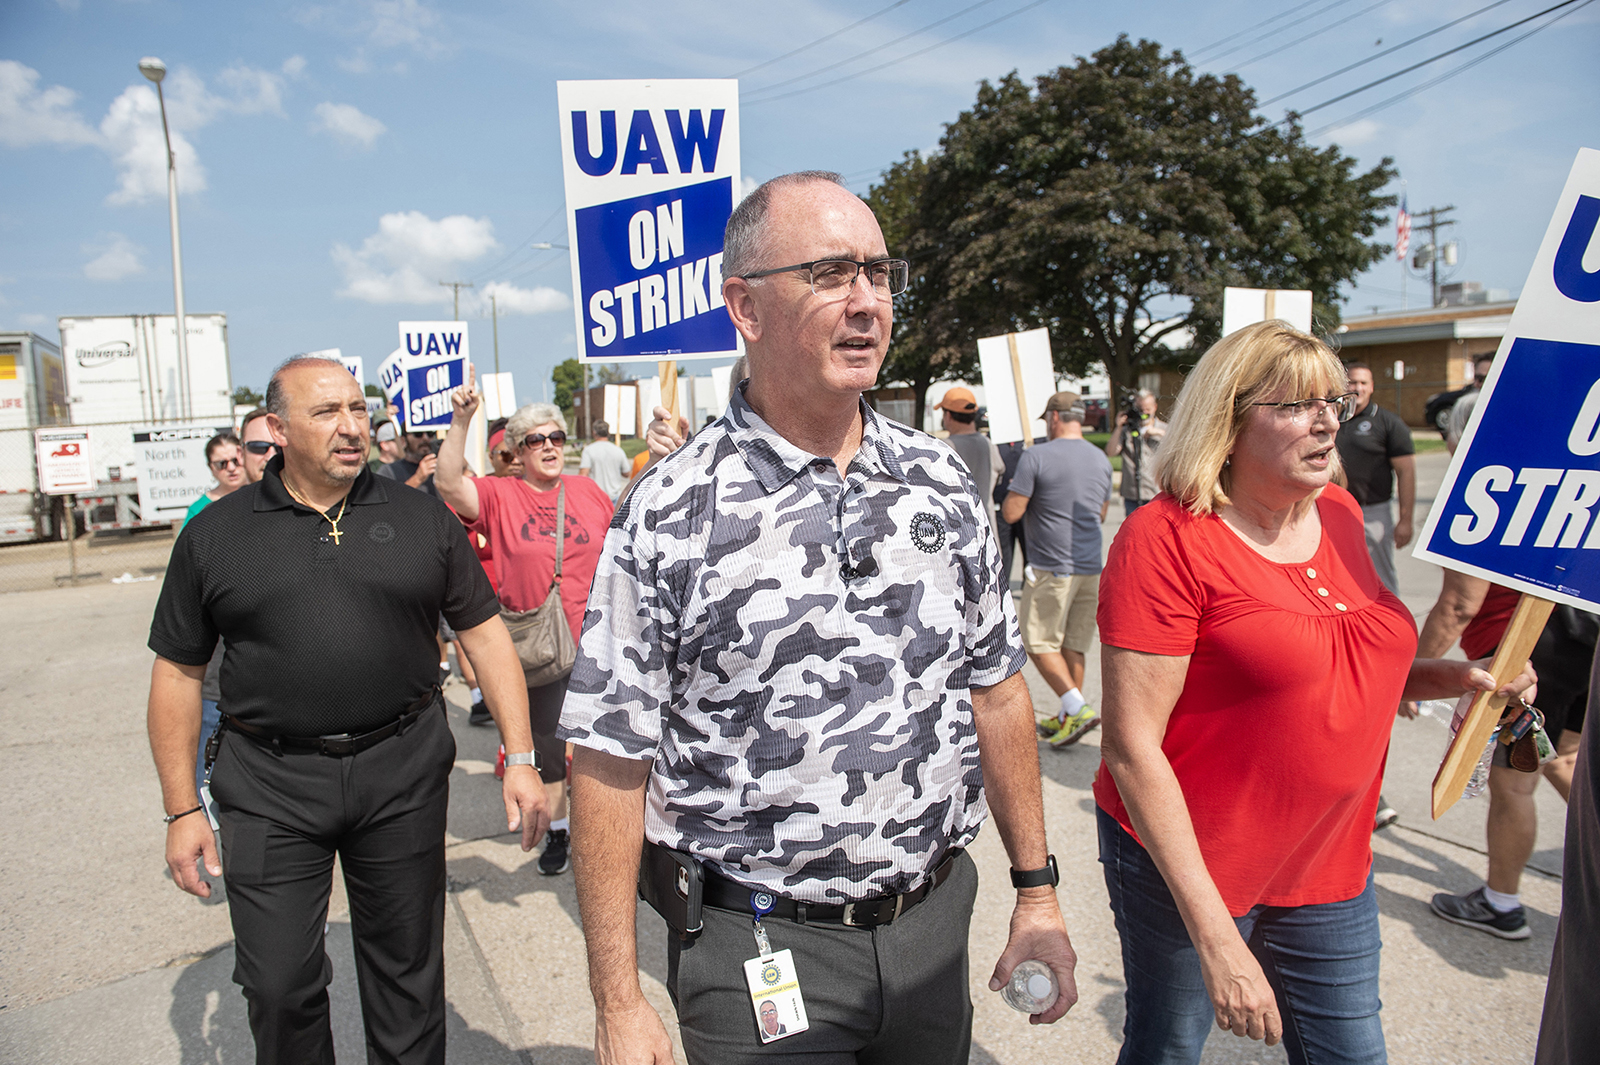 UAW president Shawn Fain and members and workers at the Mopar Parts Center Line, a Stellantis Parts Distribution Center in Center Line, Michigan, picket outside the facility after walking off their jobs at noon on September 22.